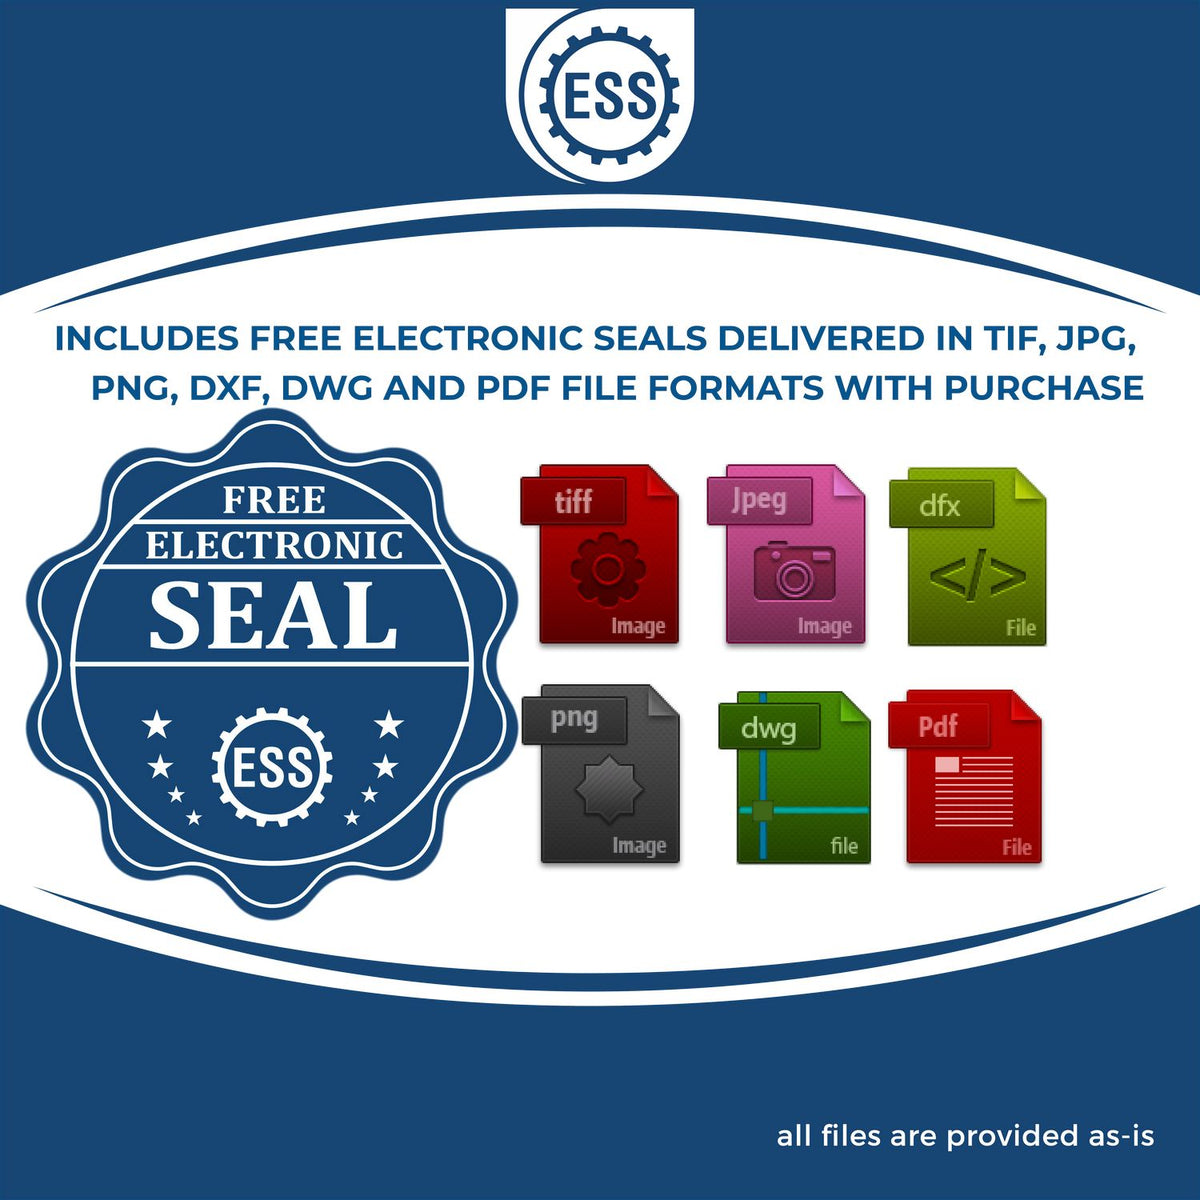 An infographic for the free electronic seal for the Premium MaxLight Pre-Inked South Dakota Geology Stamp illustrating the different file type icons such as DXF, DWG, TIF, JPG and PNG.